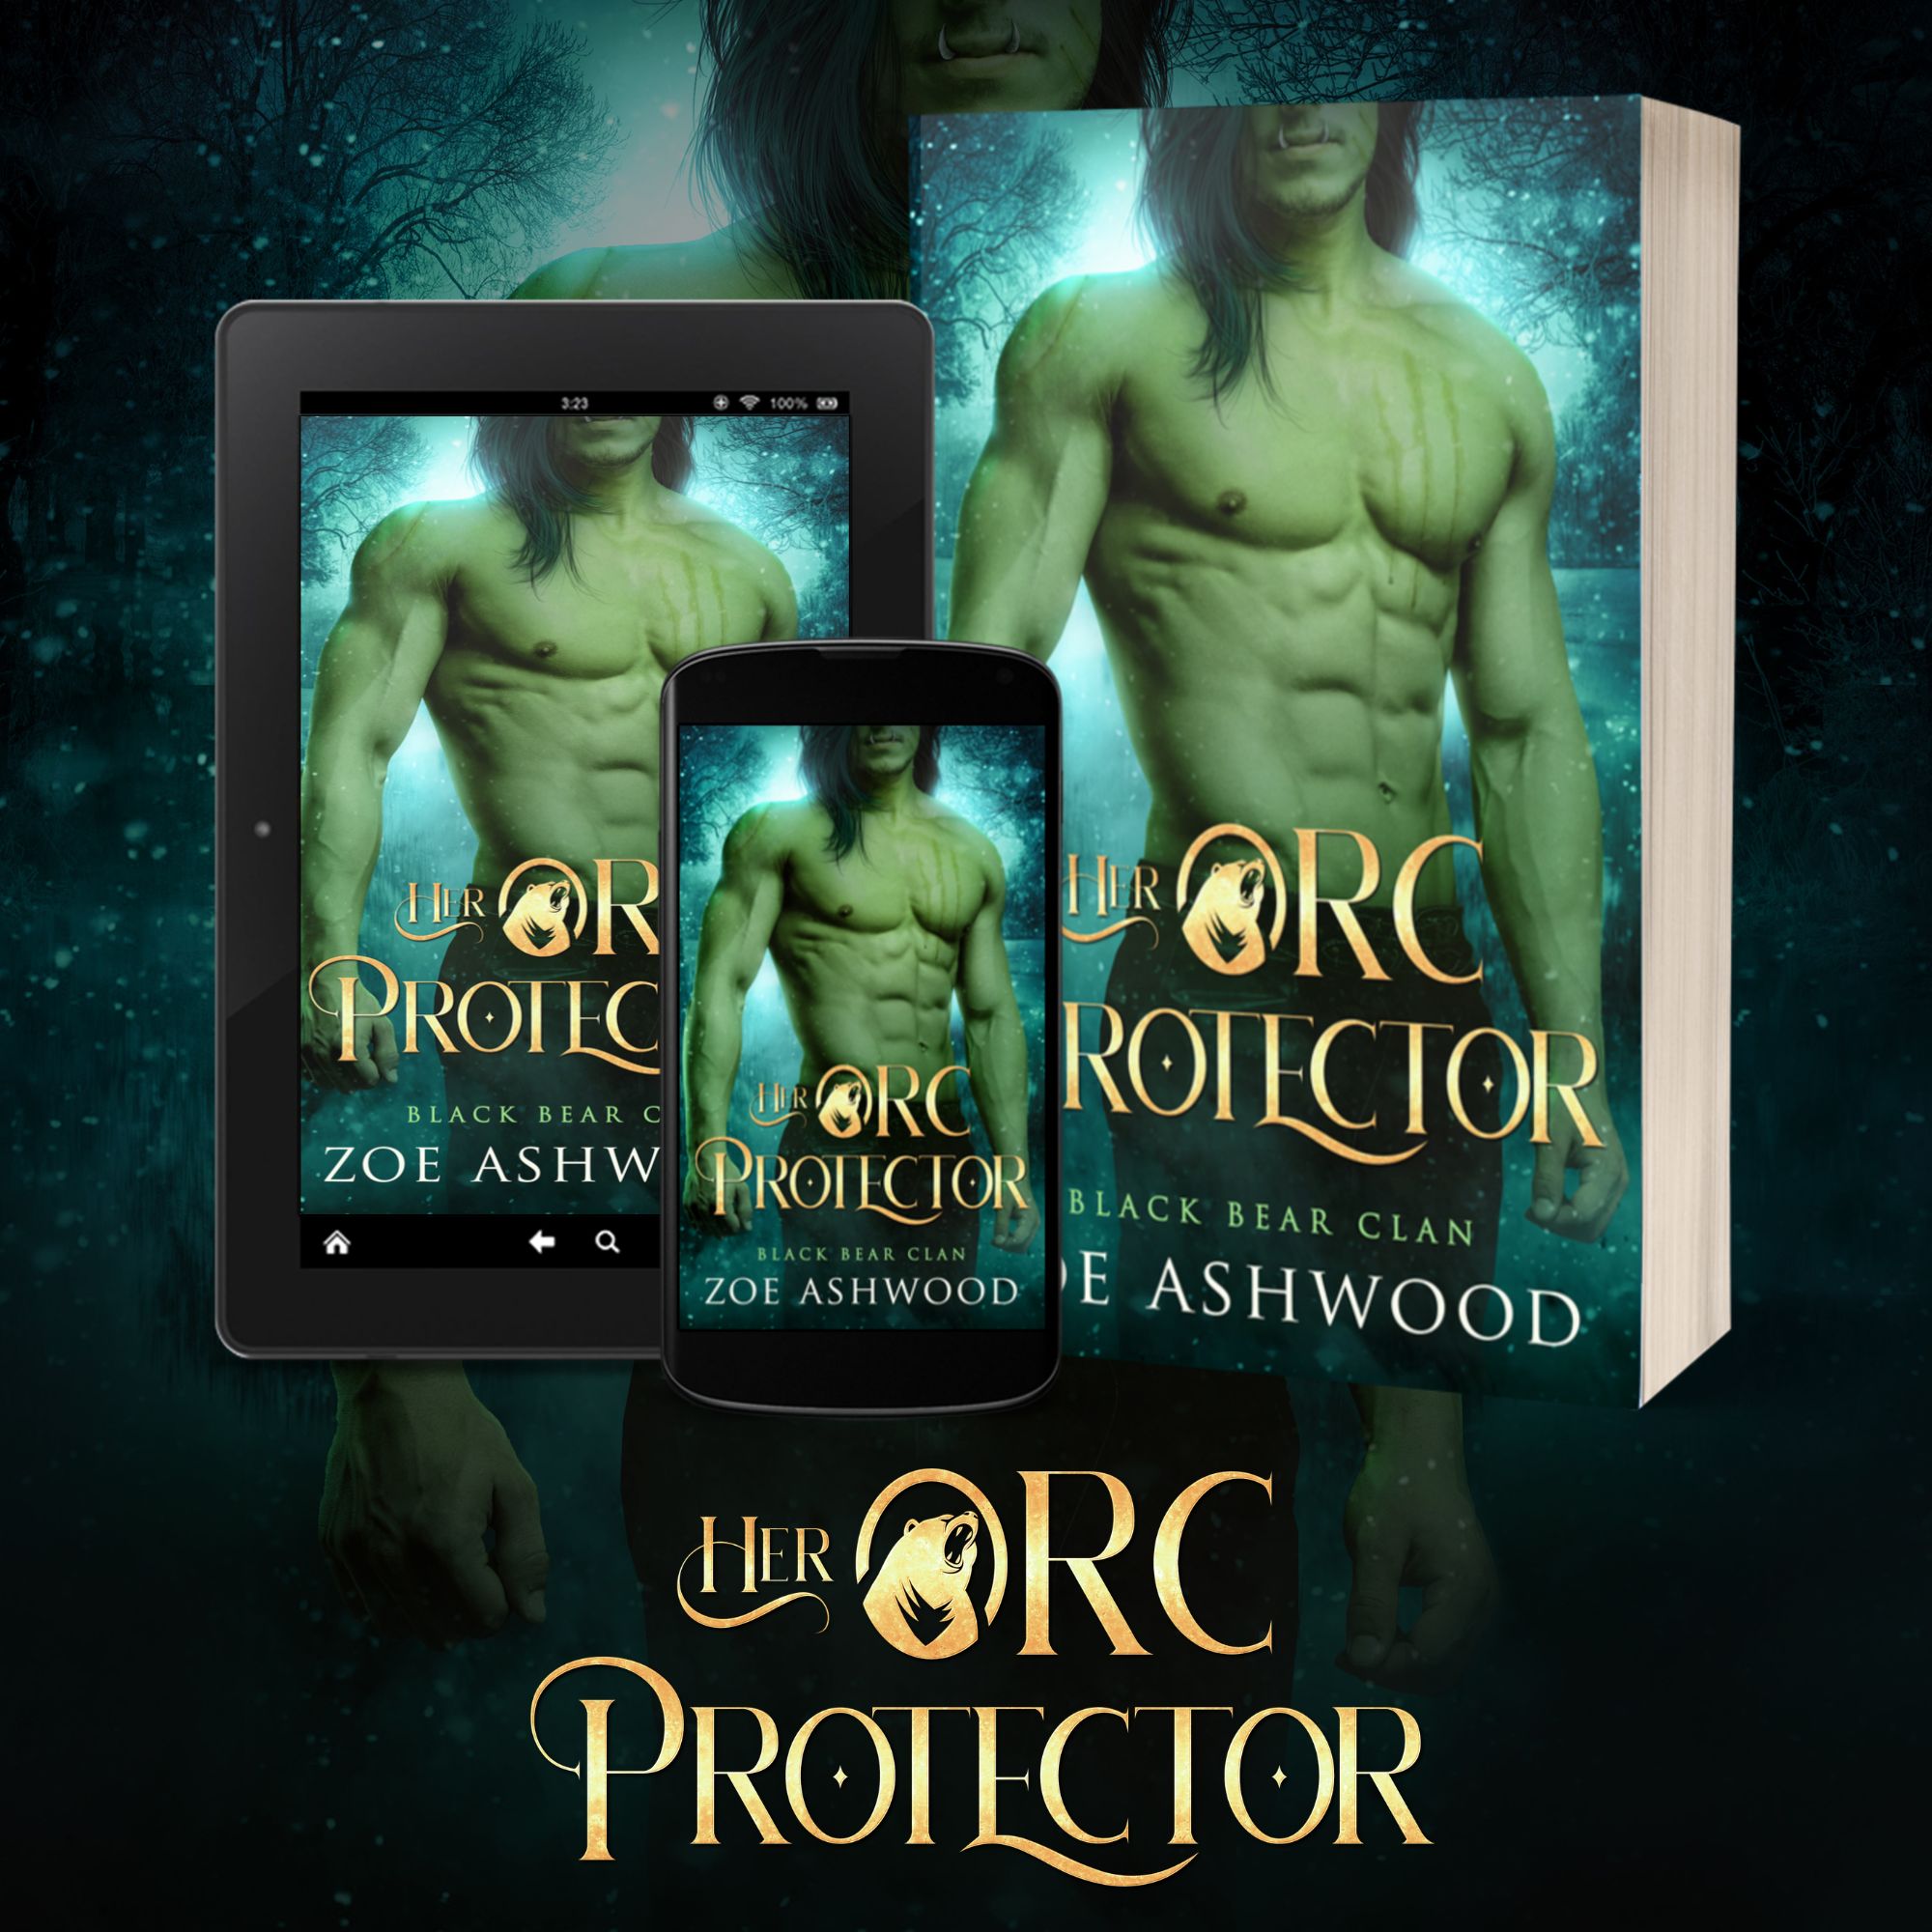 Her Orc Protector is the newest orc romance by Zoe Ashwood